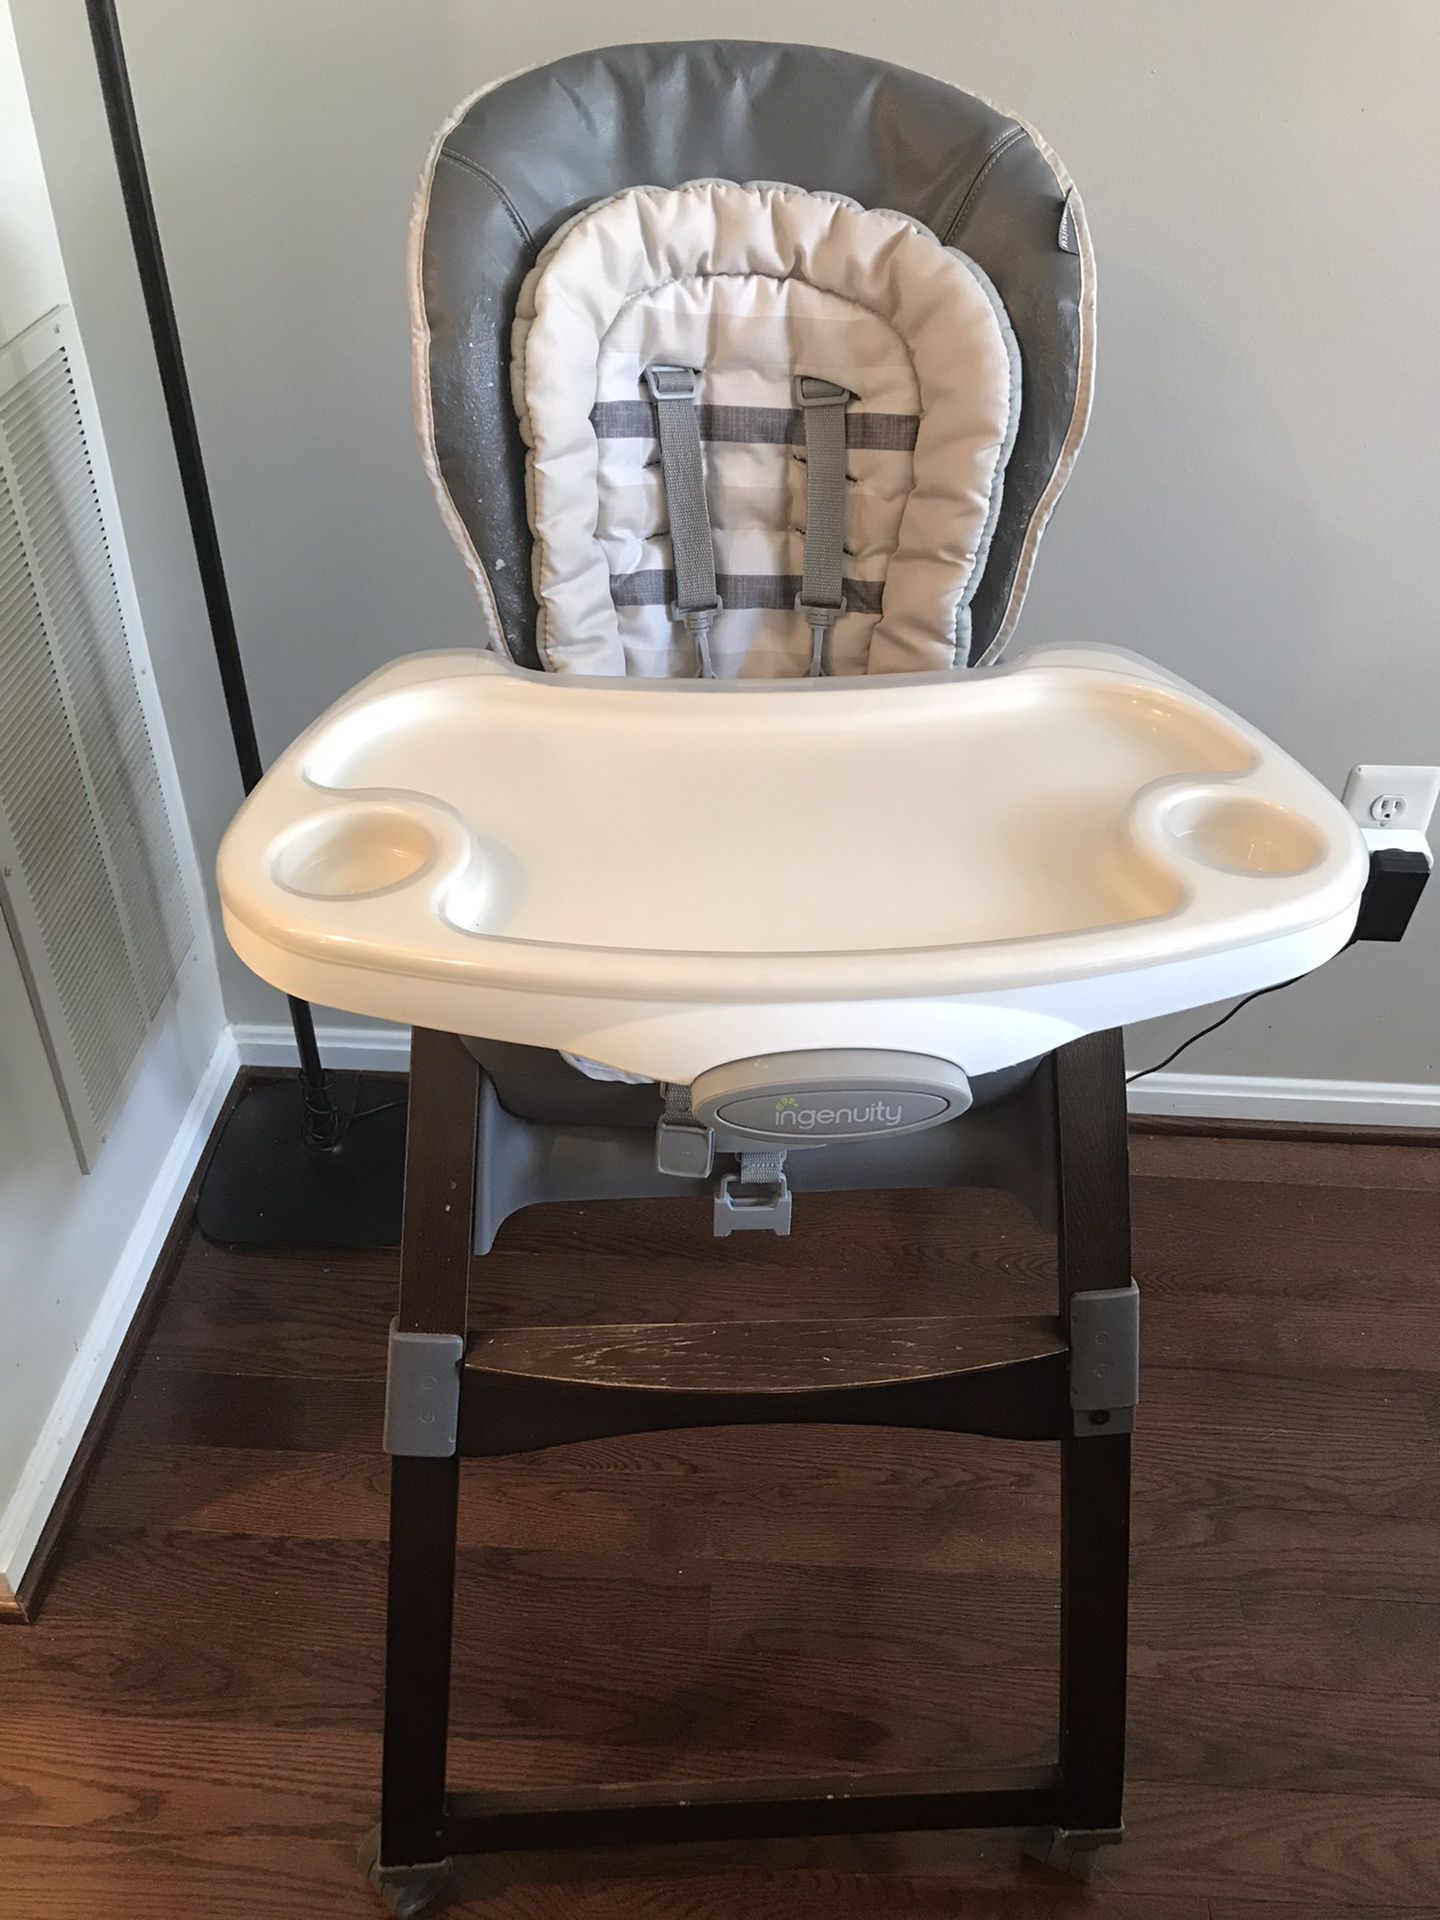 Greco High chair